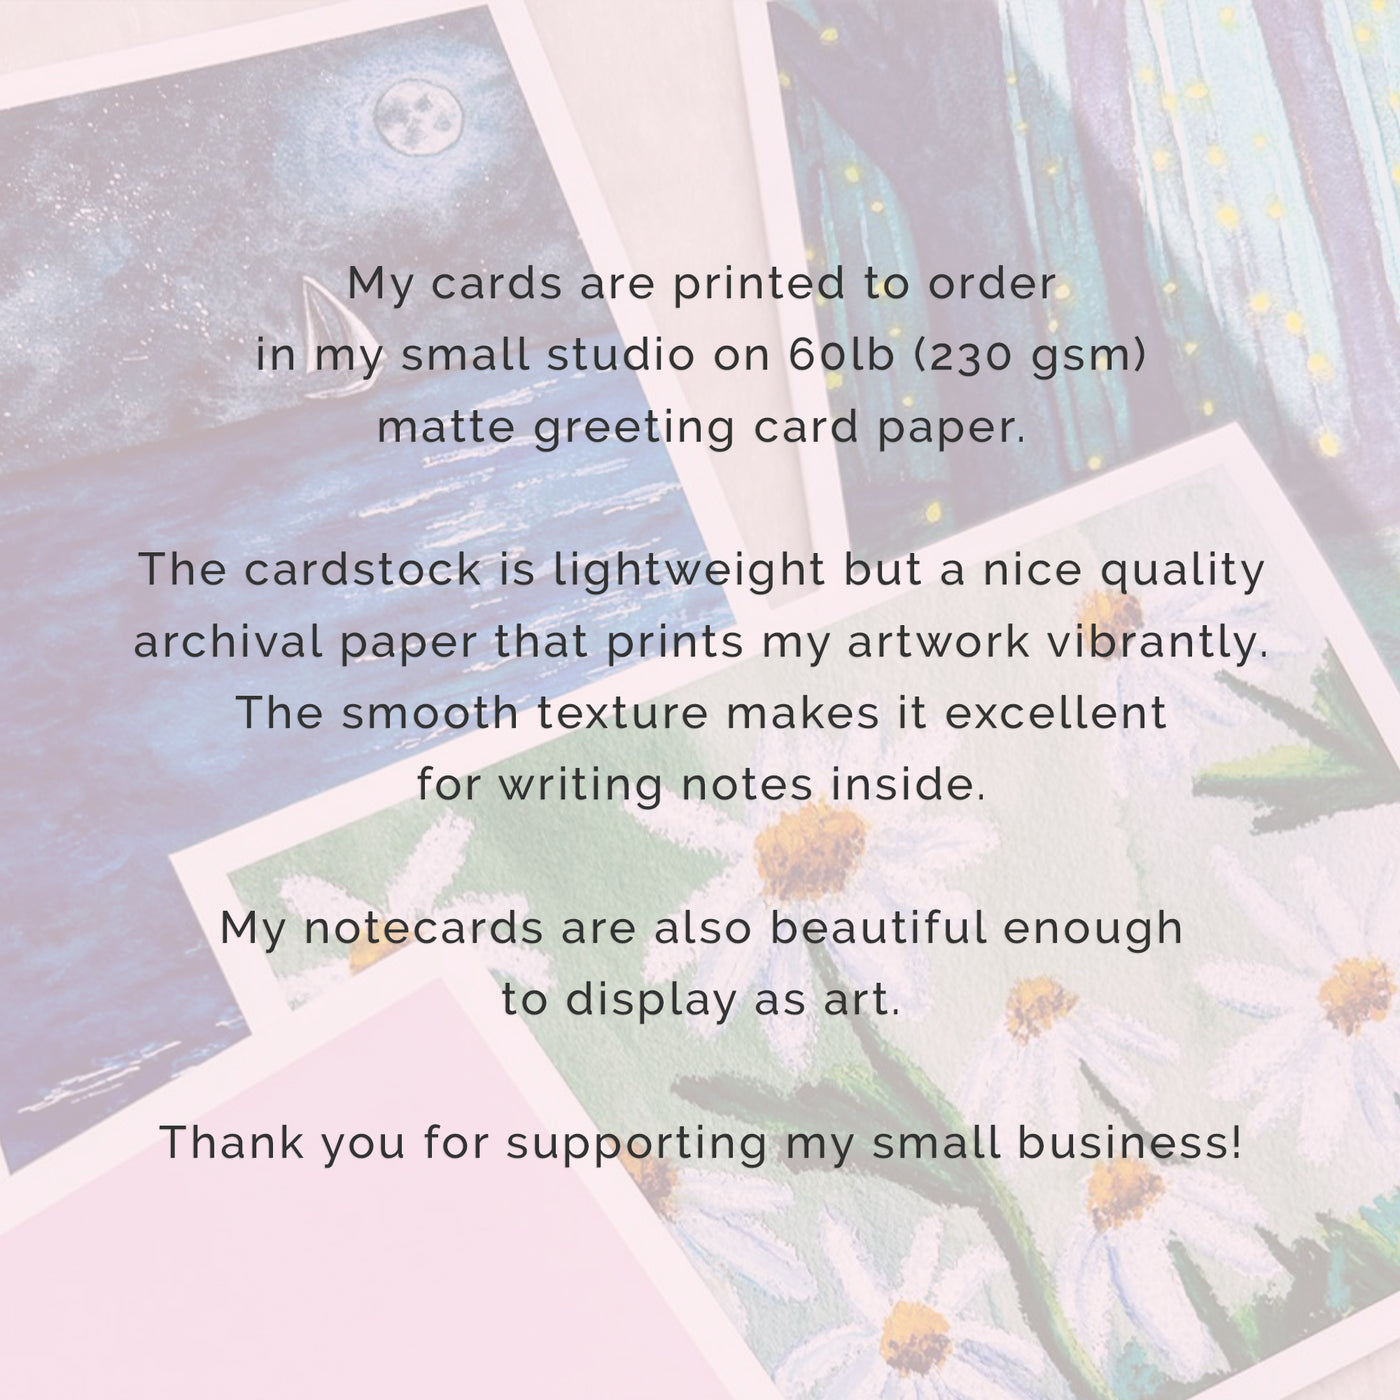 Abstract Enchanted Landscape Greeting Card